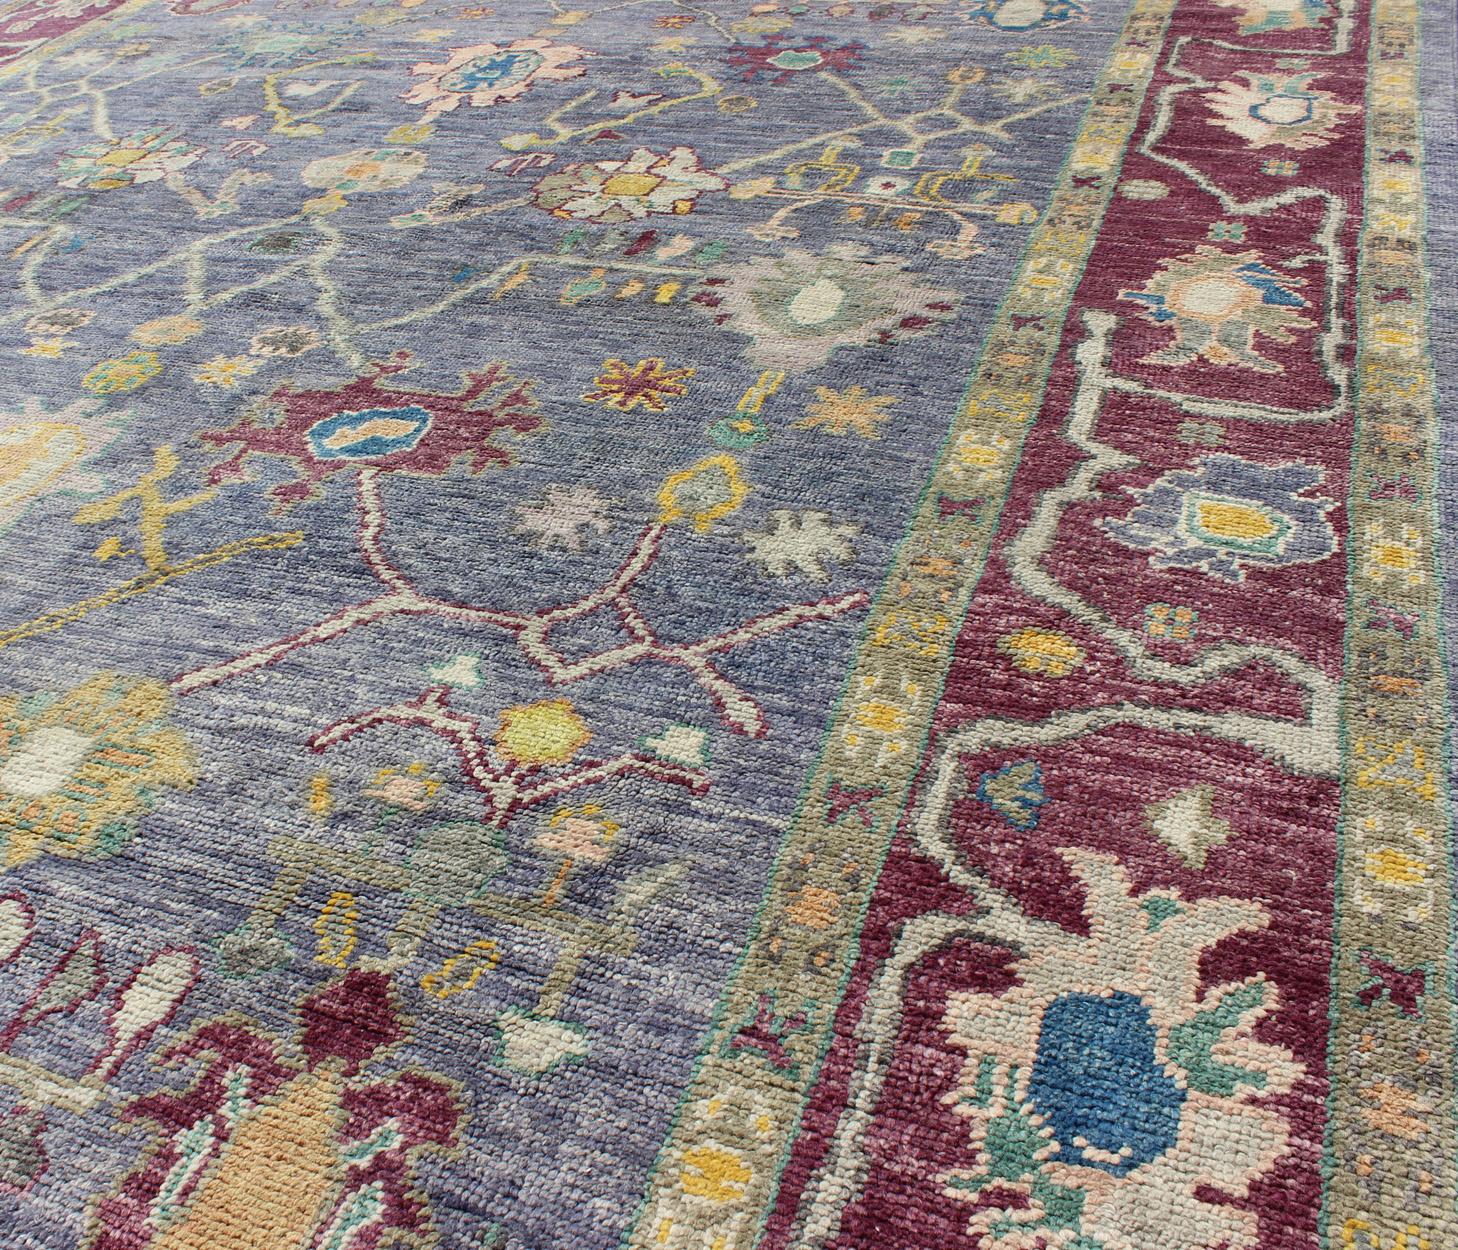 Contemporary Colorful Turkish Oushak Rug with All-Over Flower Design in Ink Blue & Maroon